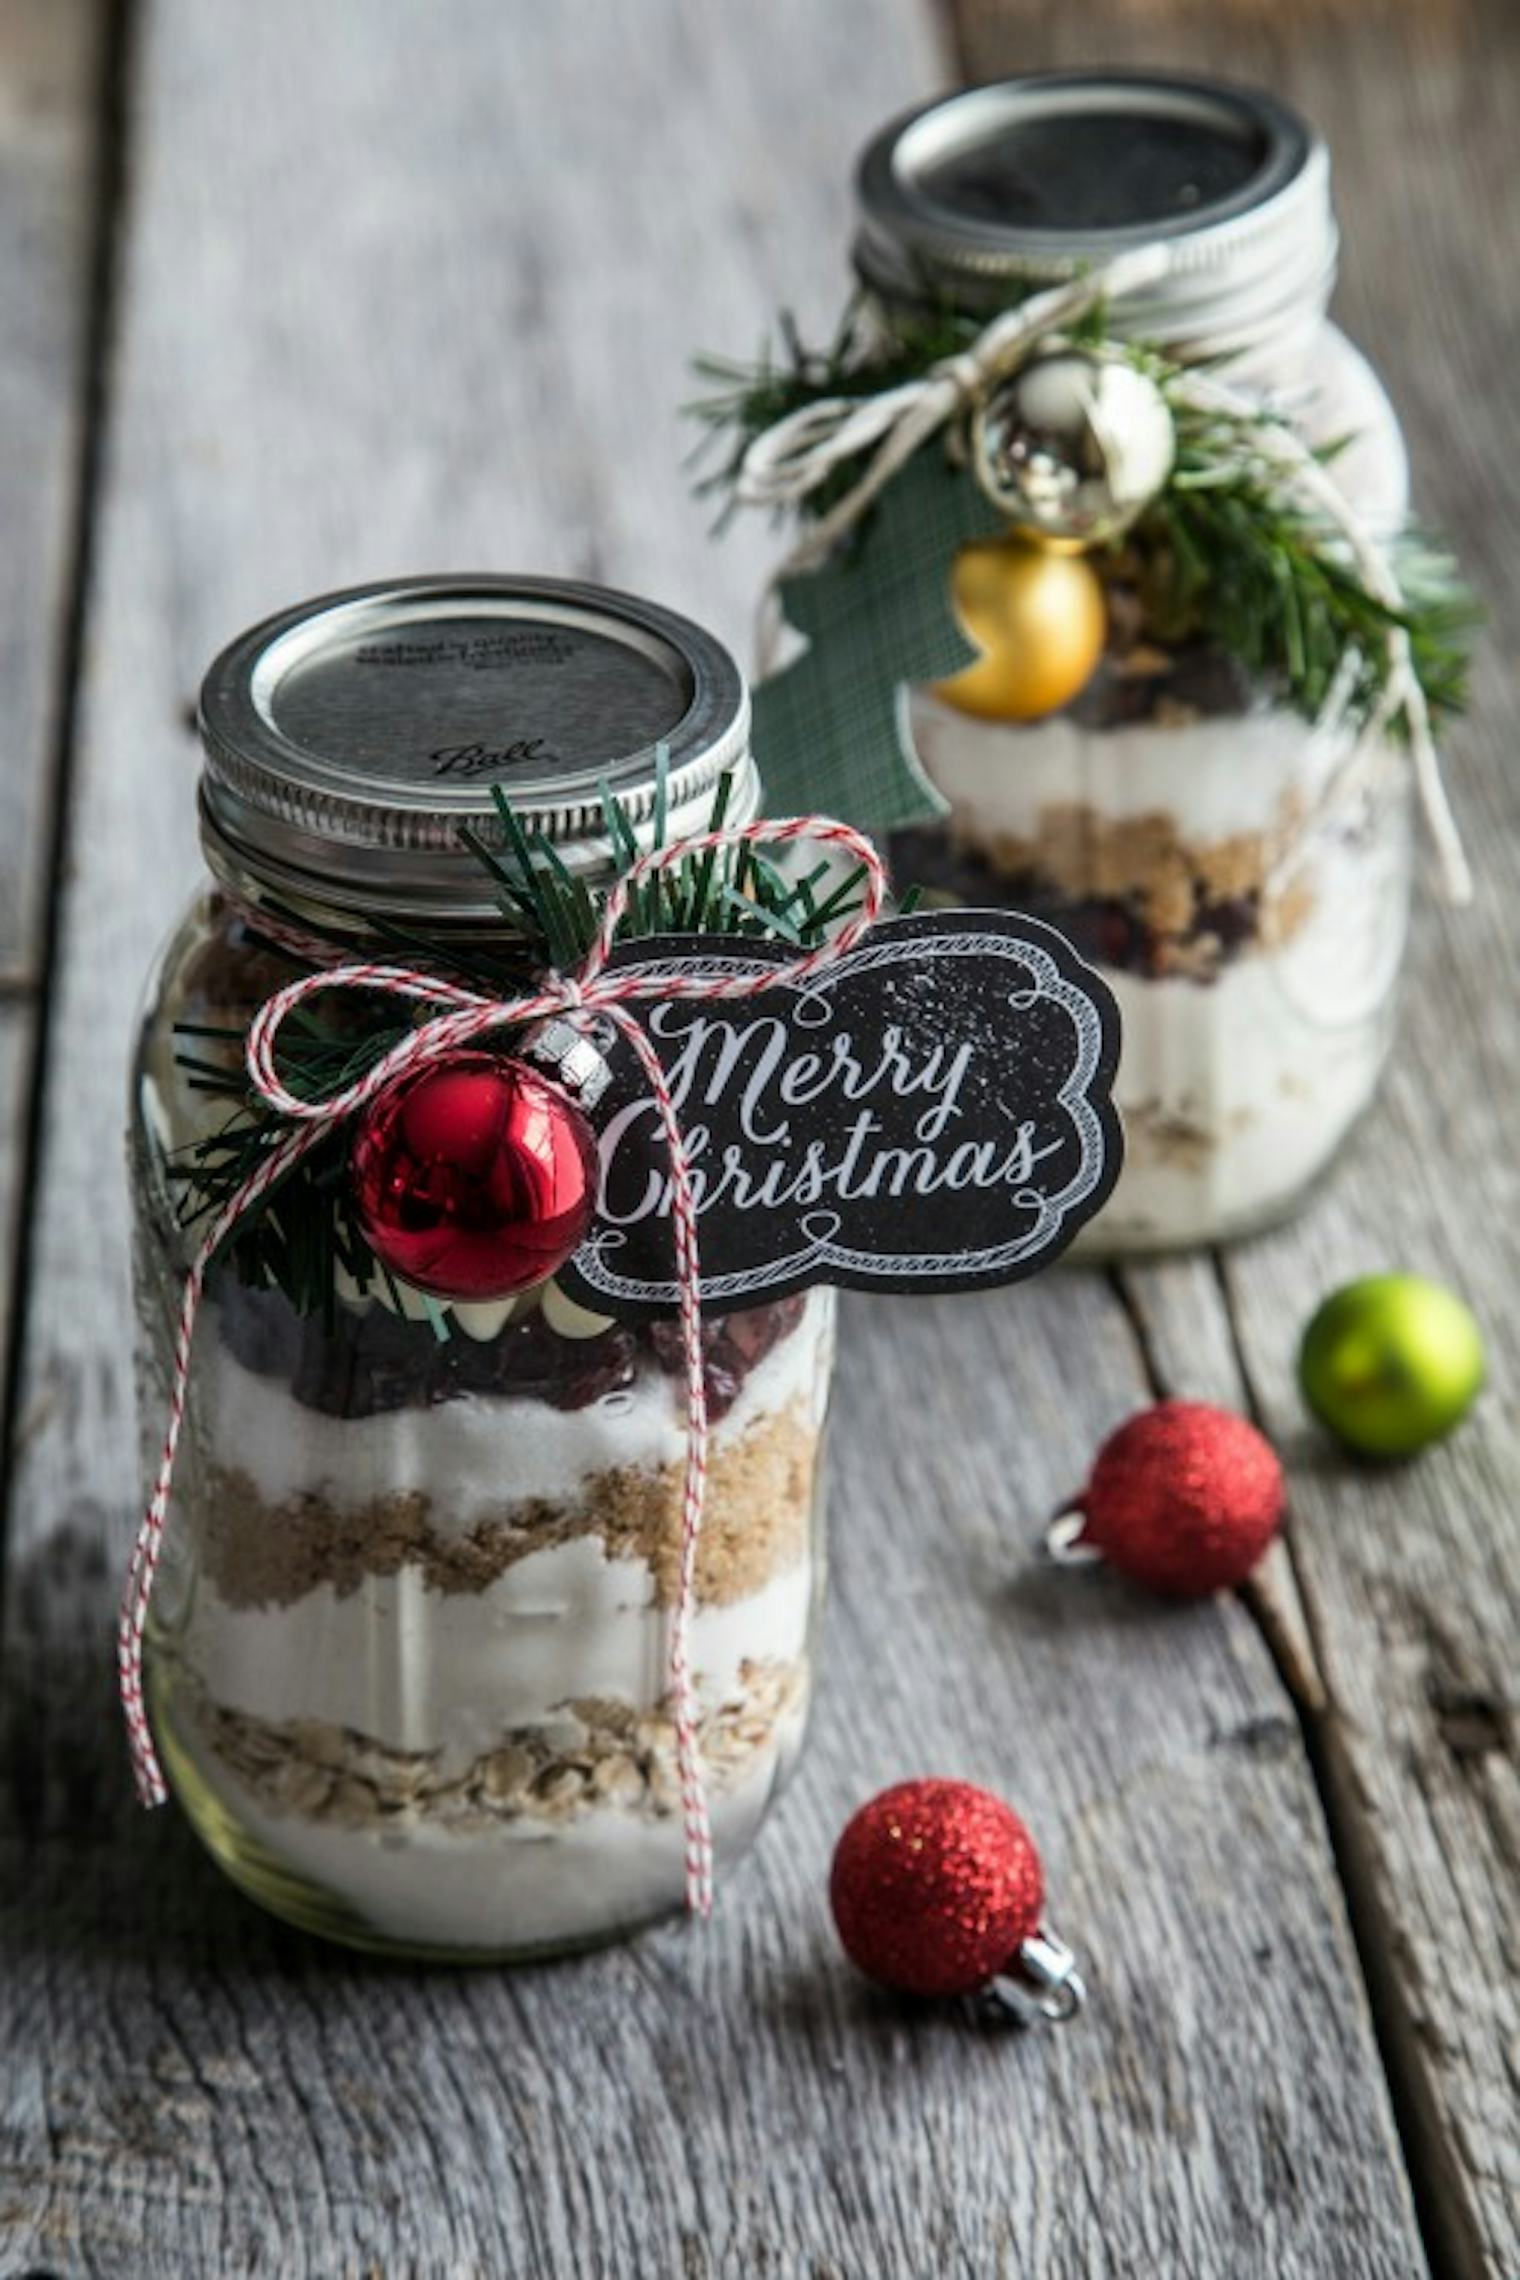 14-diy-mason-jar-holiday-gifts-that-are-cute-practical